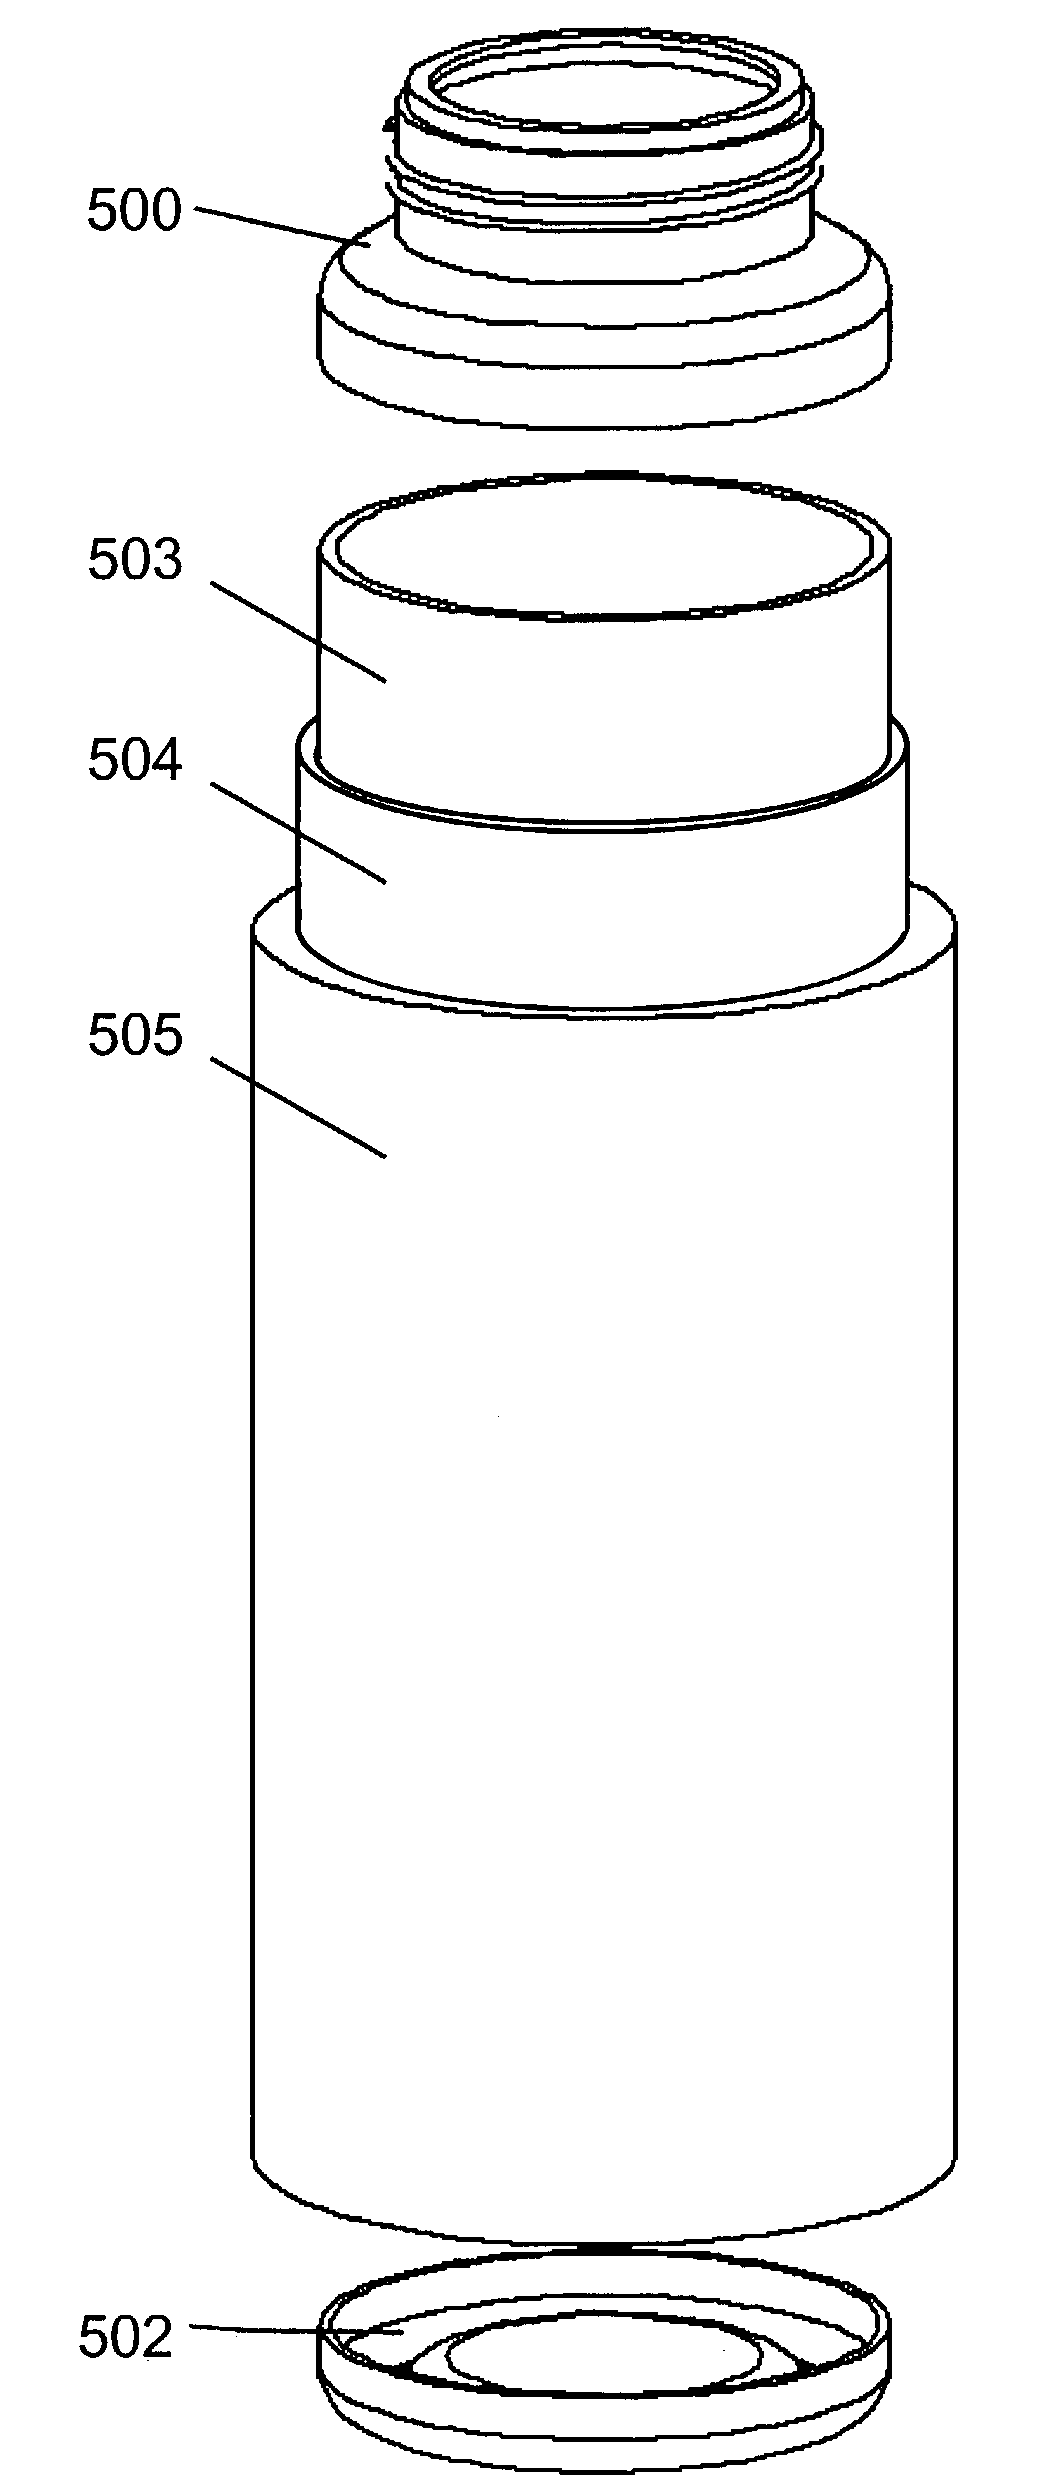 Self-cooling containers for liquids